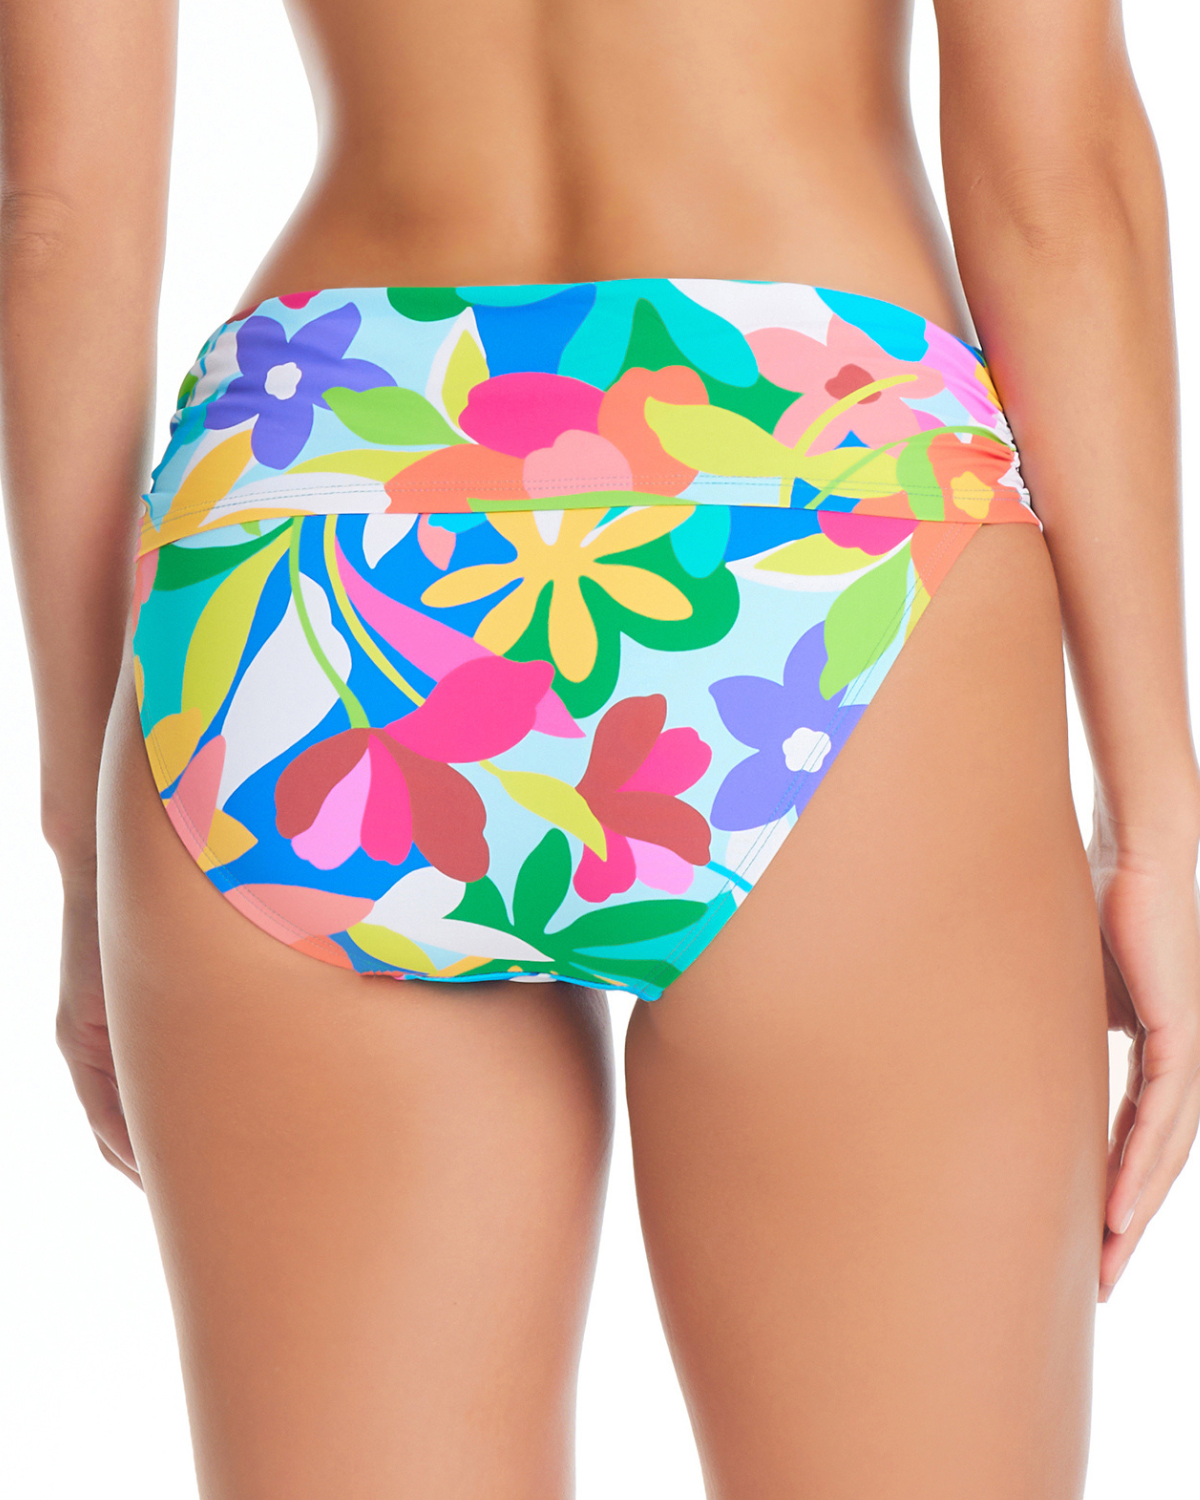 Model wearing a sarong hipster bottom in a blue, white, turquoise, purple, orange, white and red abstract floral print 